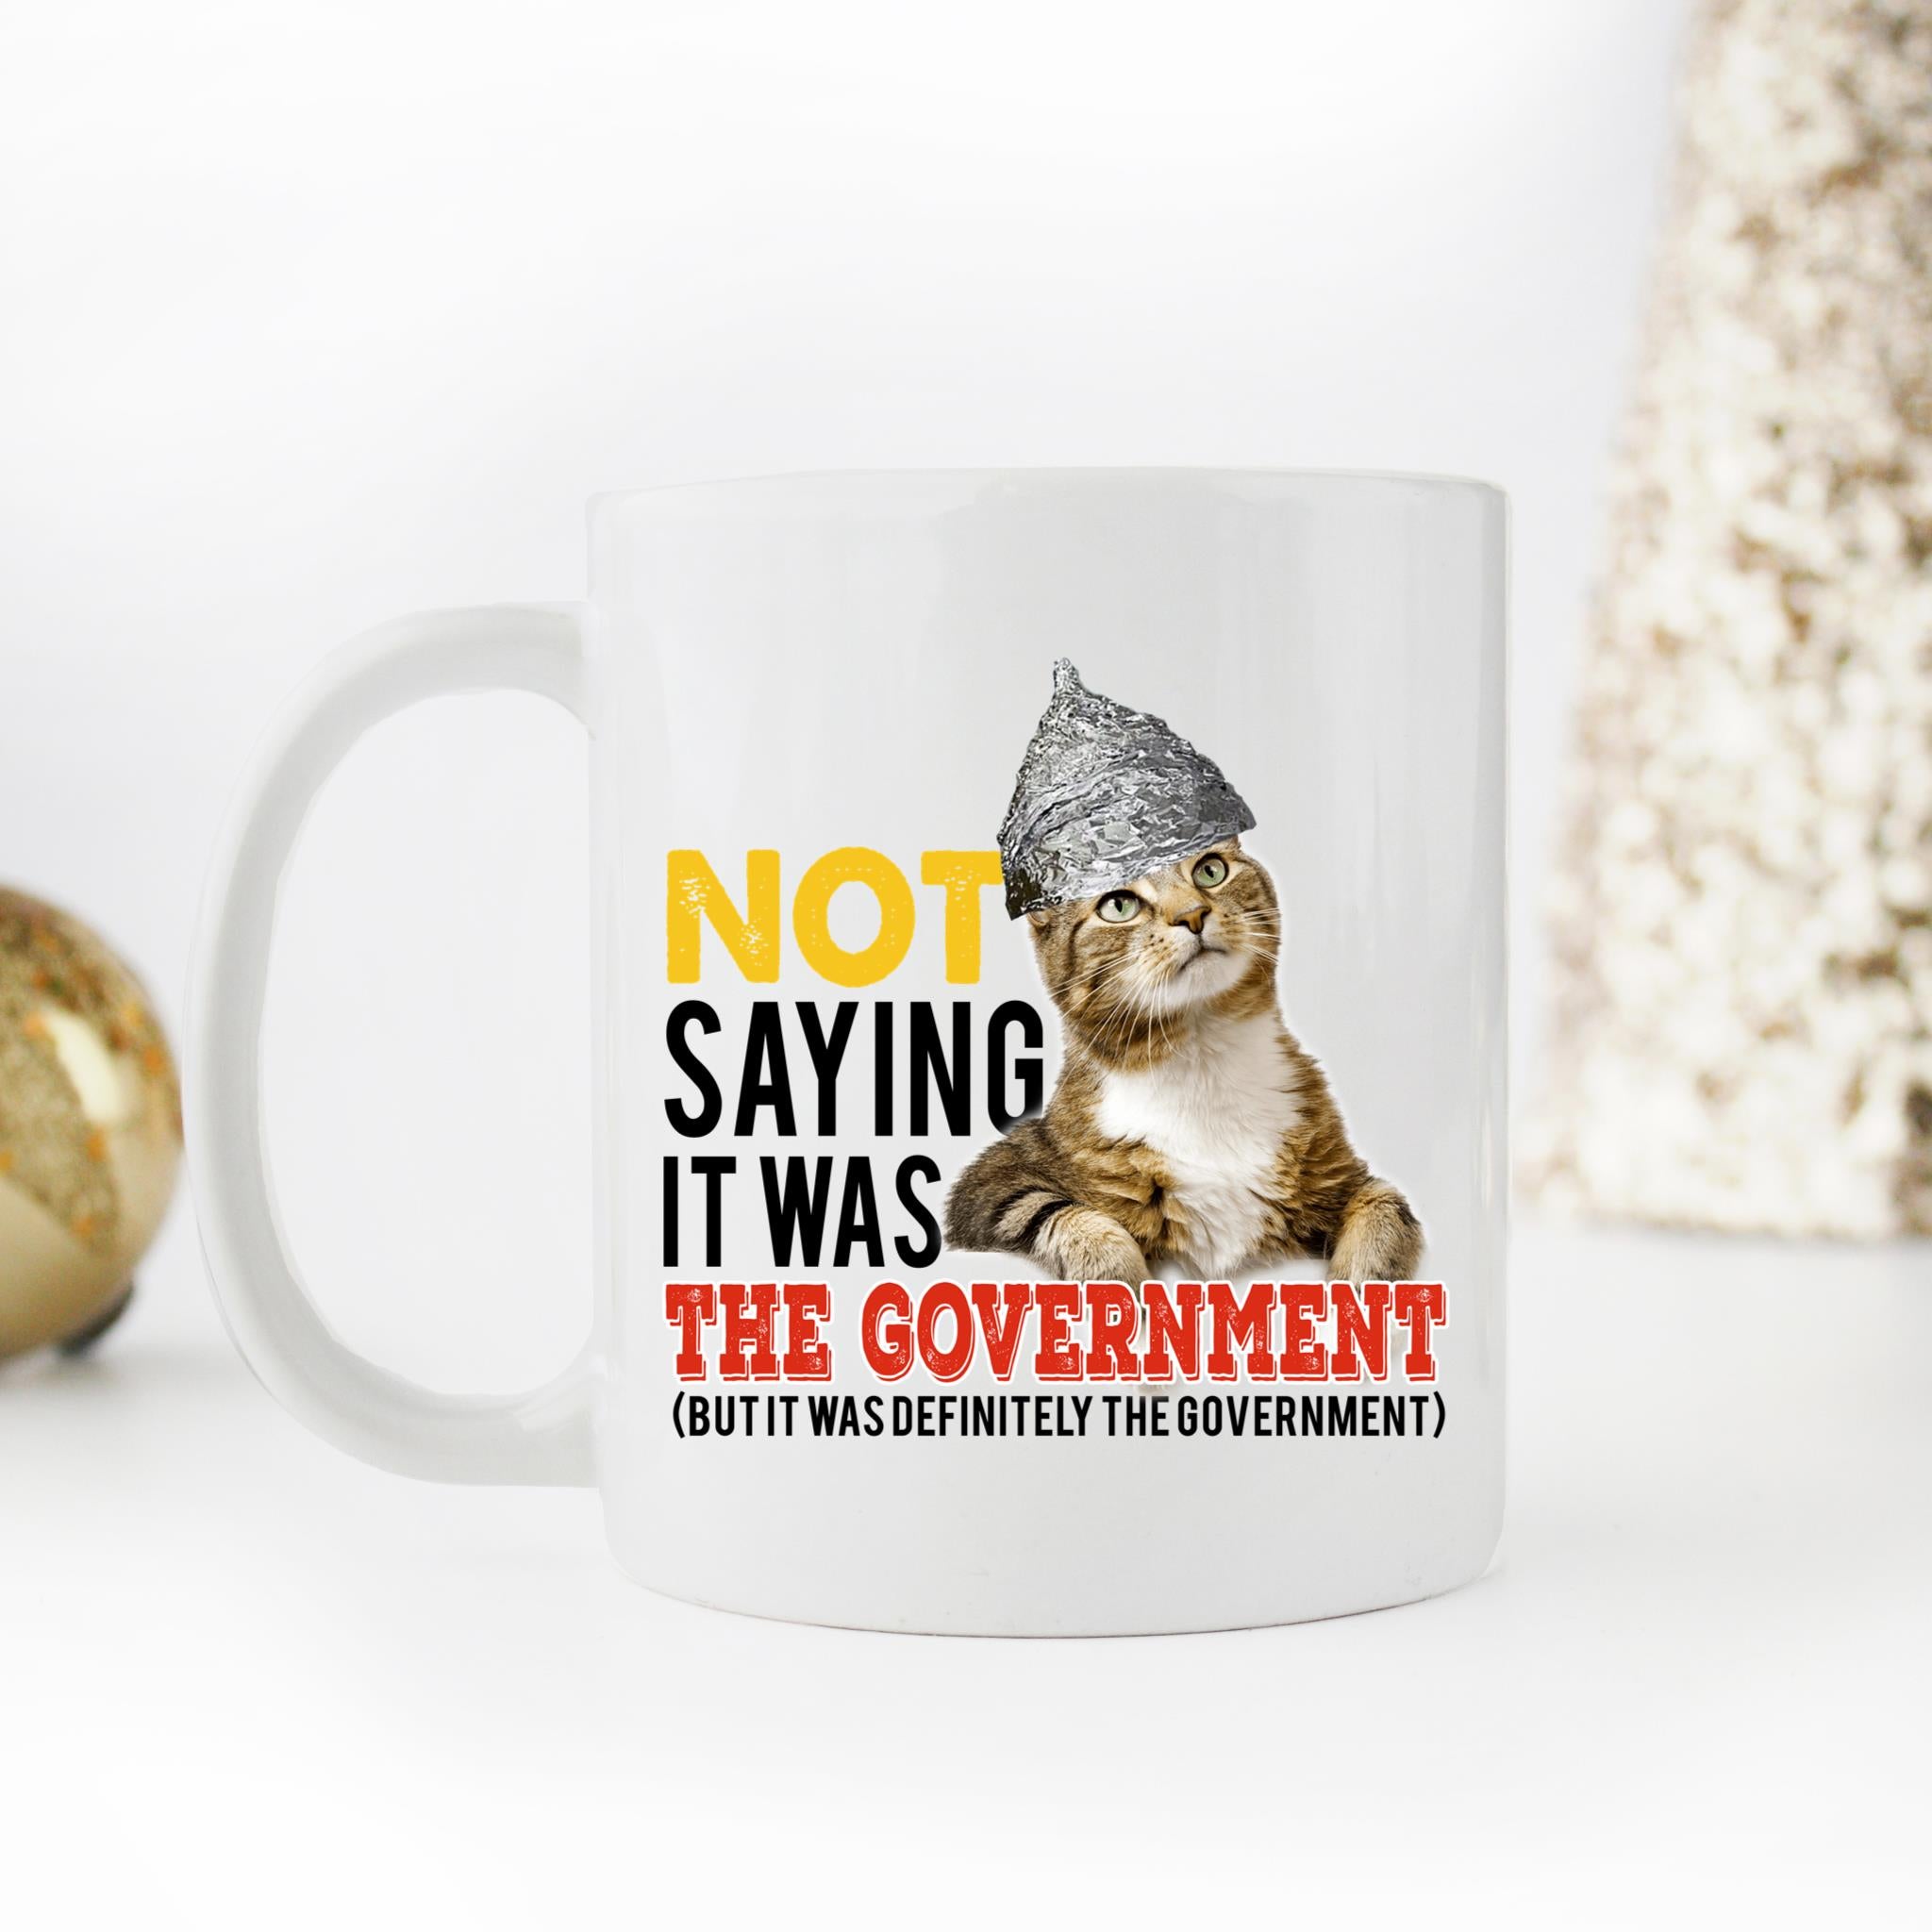 Skitongifts Coffee Mug Funny Ceramic Novelty NH191221-Cat Tin Foil Hat Conspiracy. Not Saying It Was The Government Tcmvrlb